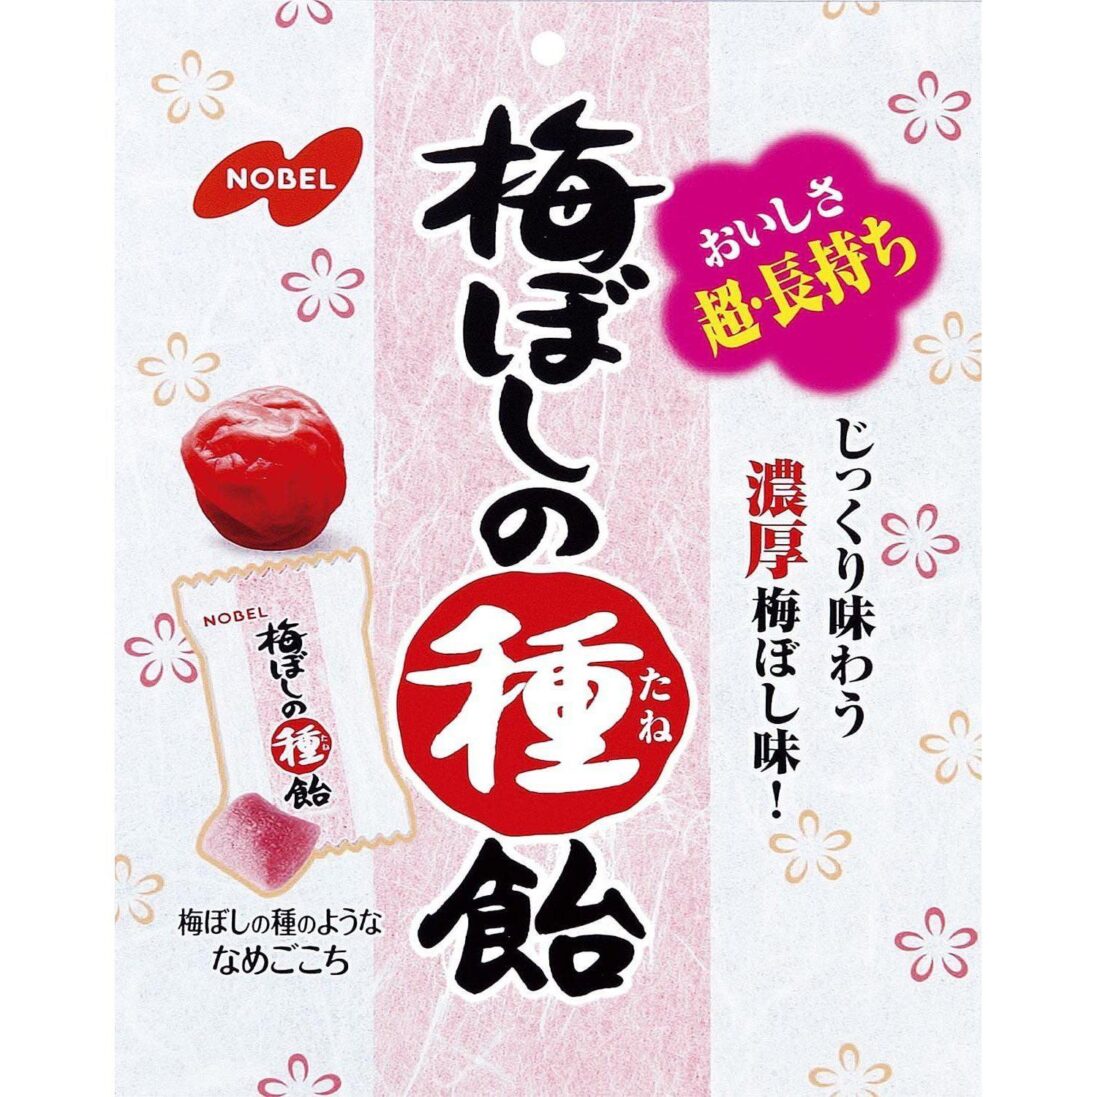 Nobel Umeboshi no Taneame Pickled Plum Seed Candy 30g